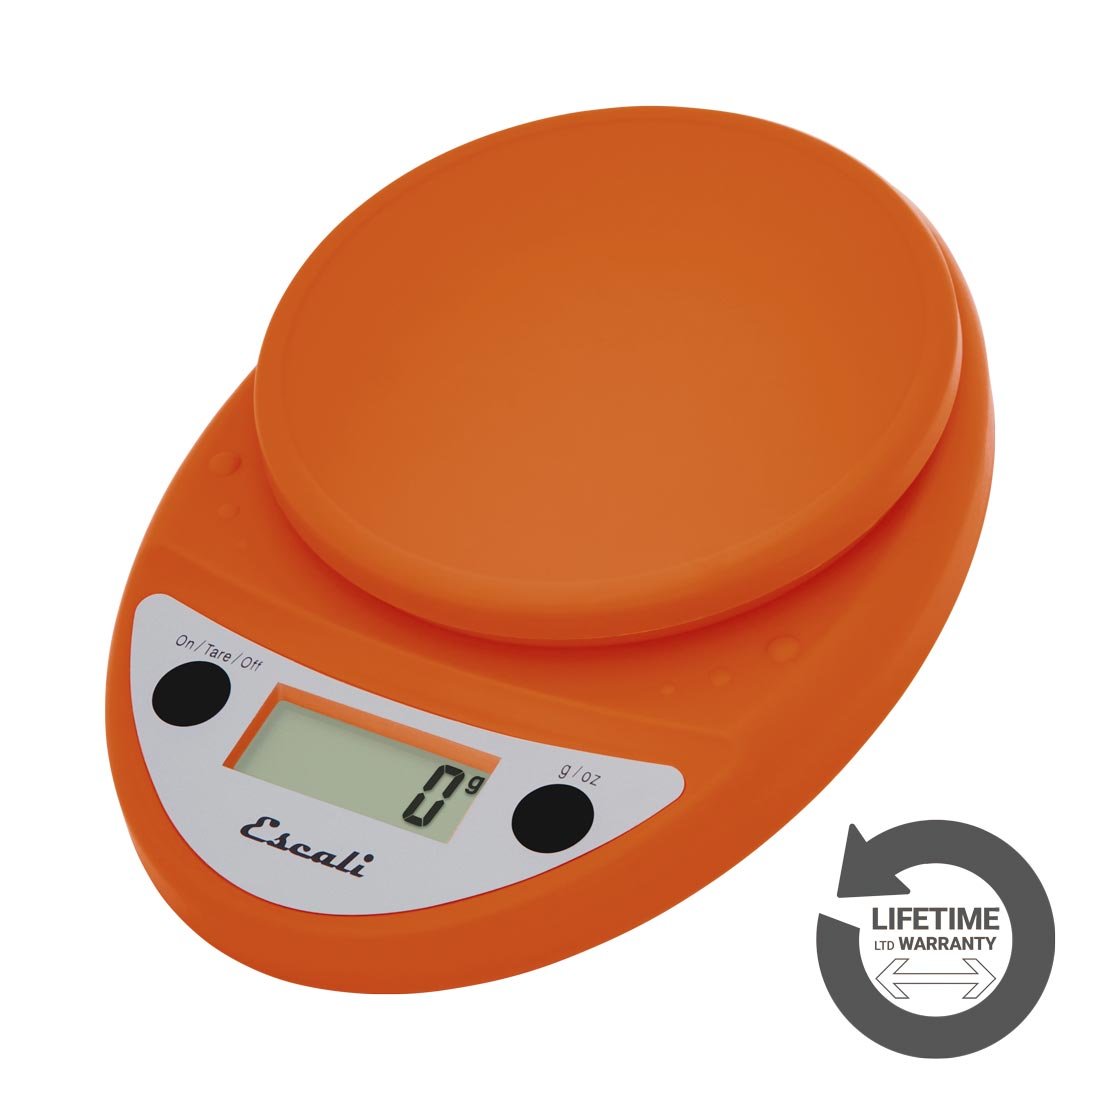 Escali Primo Digital Food Scale Multi-Functional Kitchen Scale and Baking Scale for Precise Weight Measuring and Portion Control, 8.5 x 6 x 1.5 inches, Pumpkin Orange